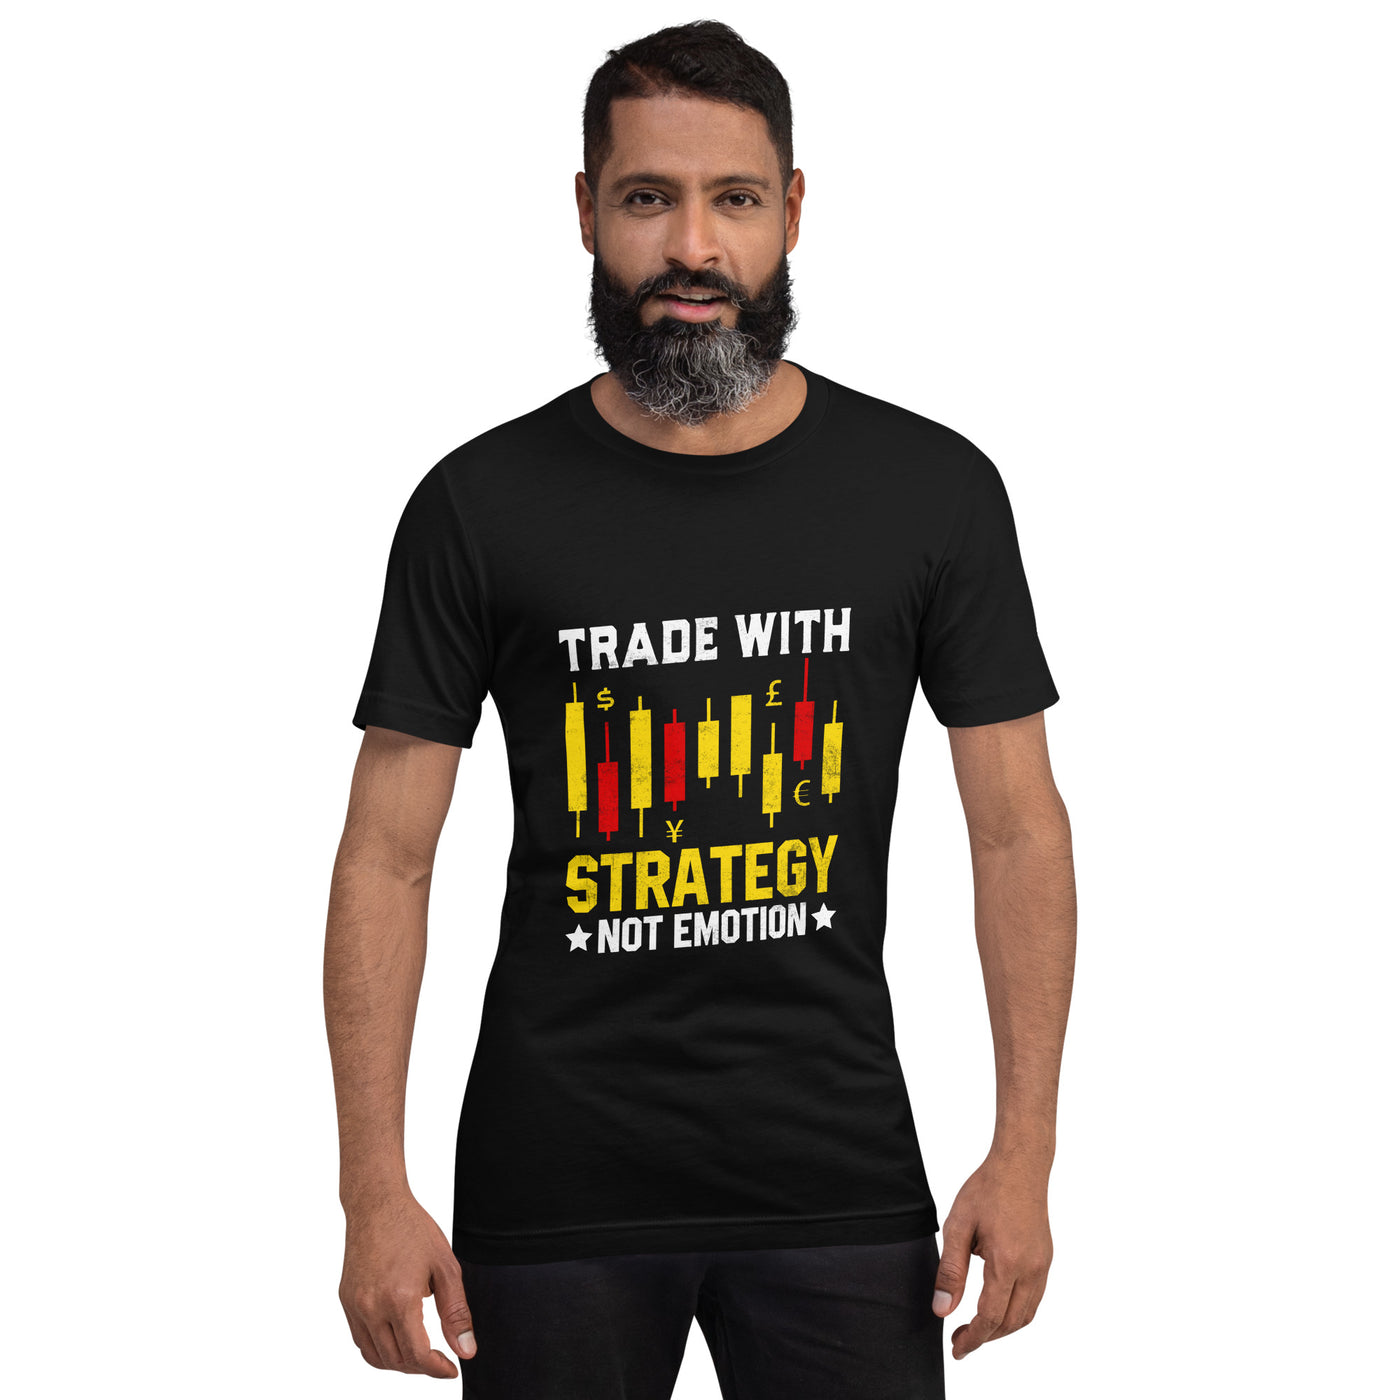 Trade with Strategy not Emotion - Unisex t-shirt